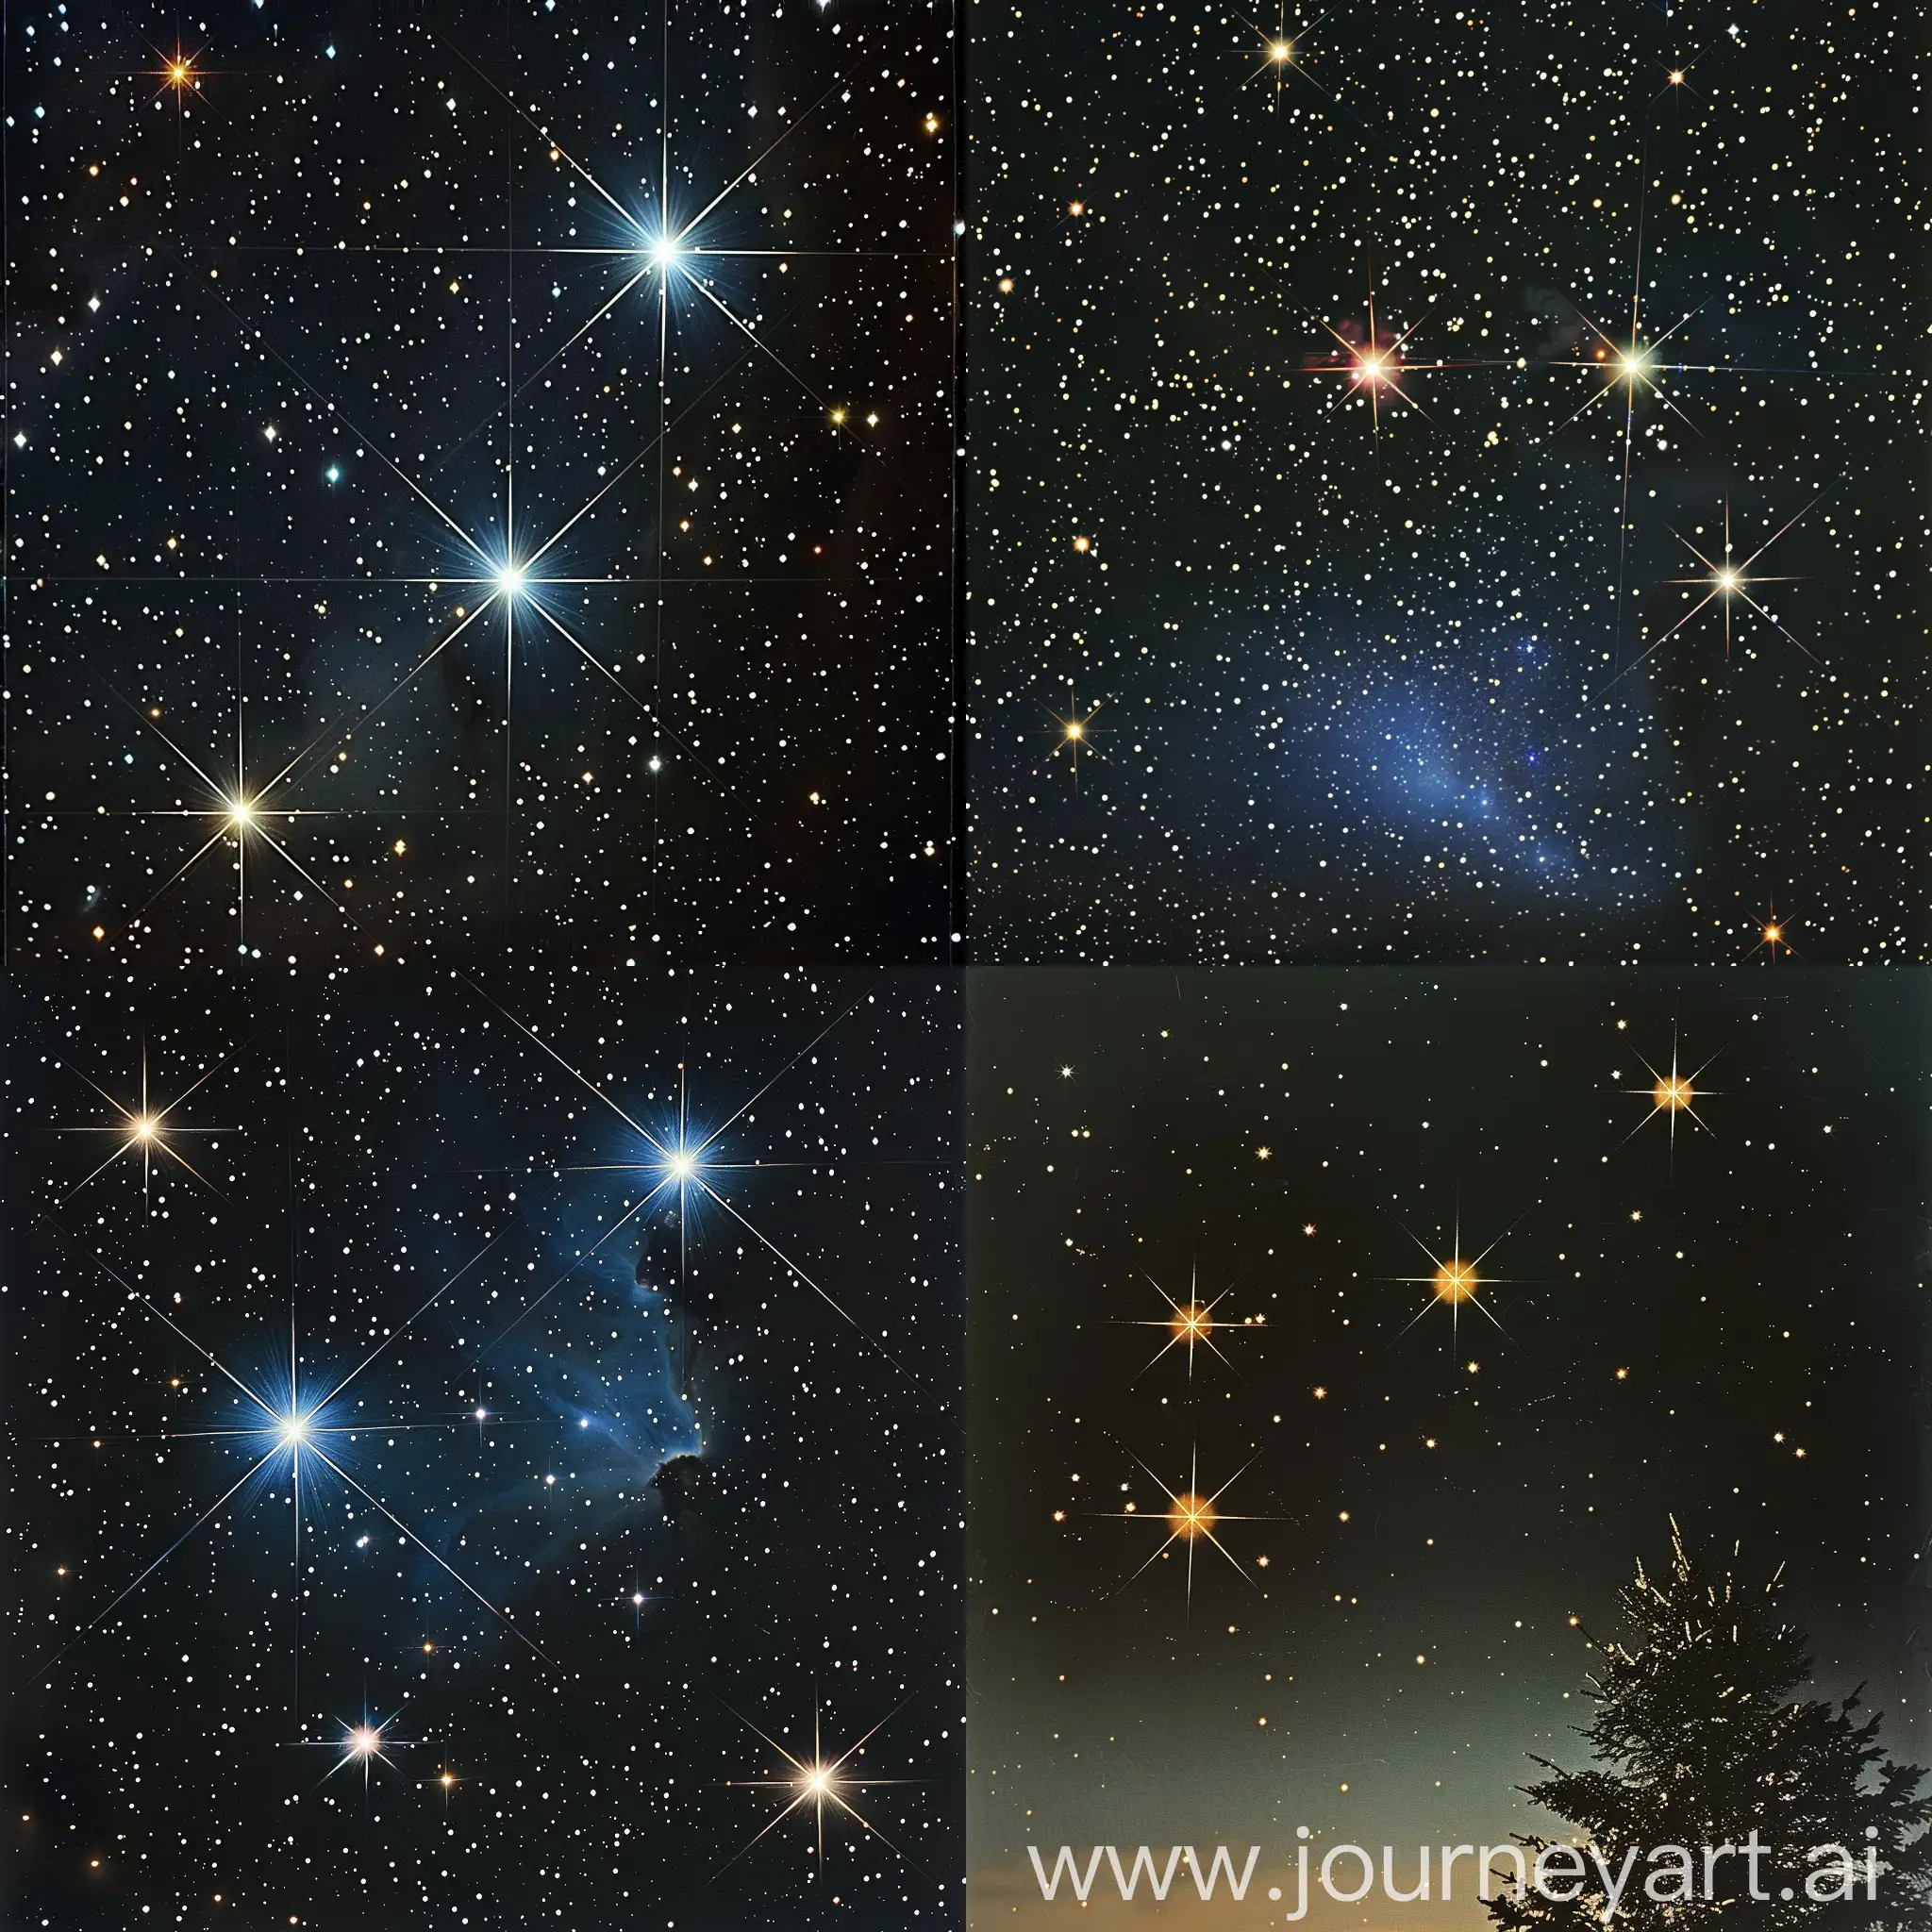 Night-Sky-with-Three-Prominent-Star-Shapes-in-Invisible-Triangle-Formation